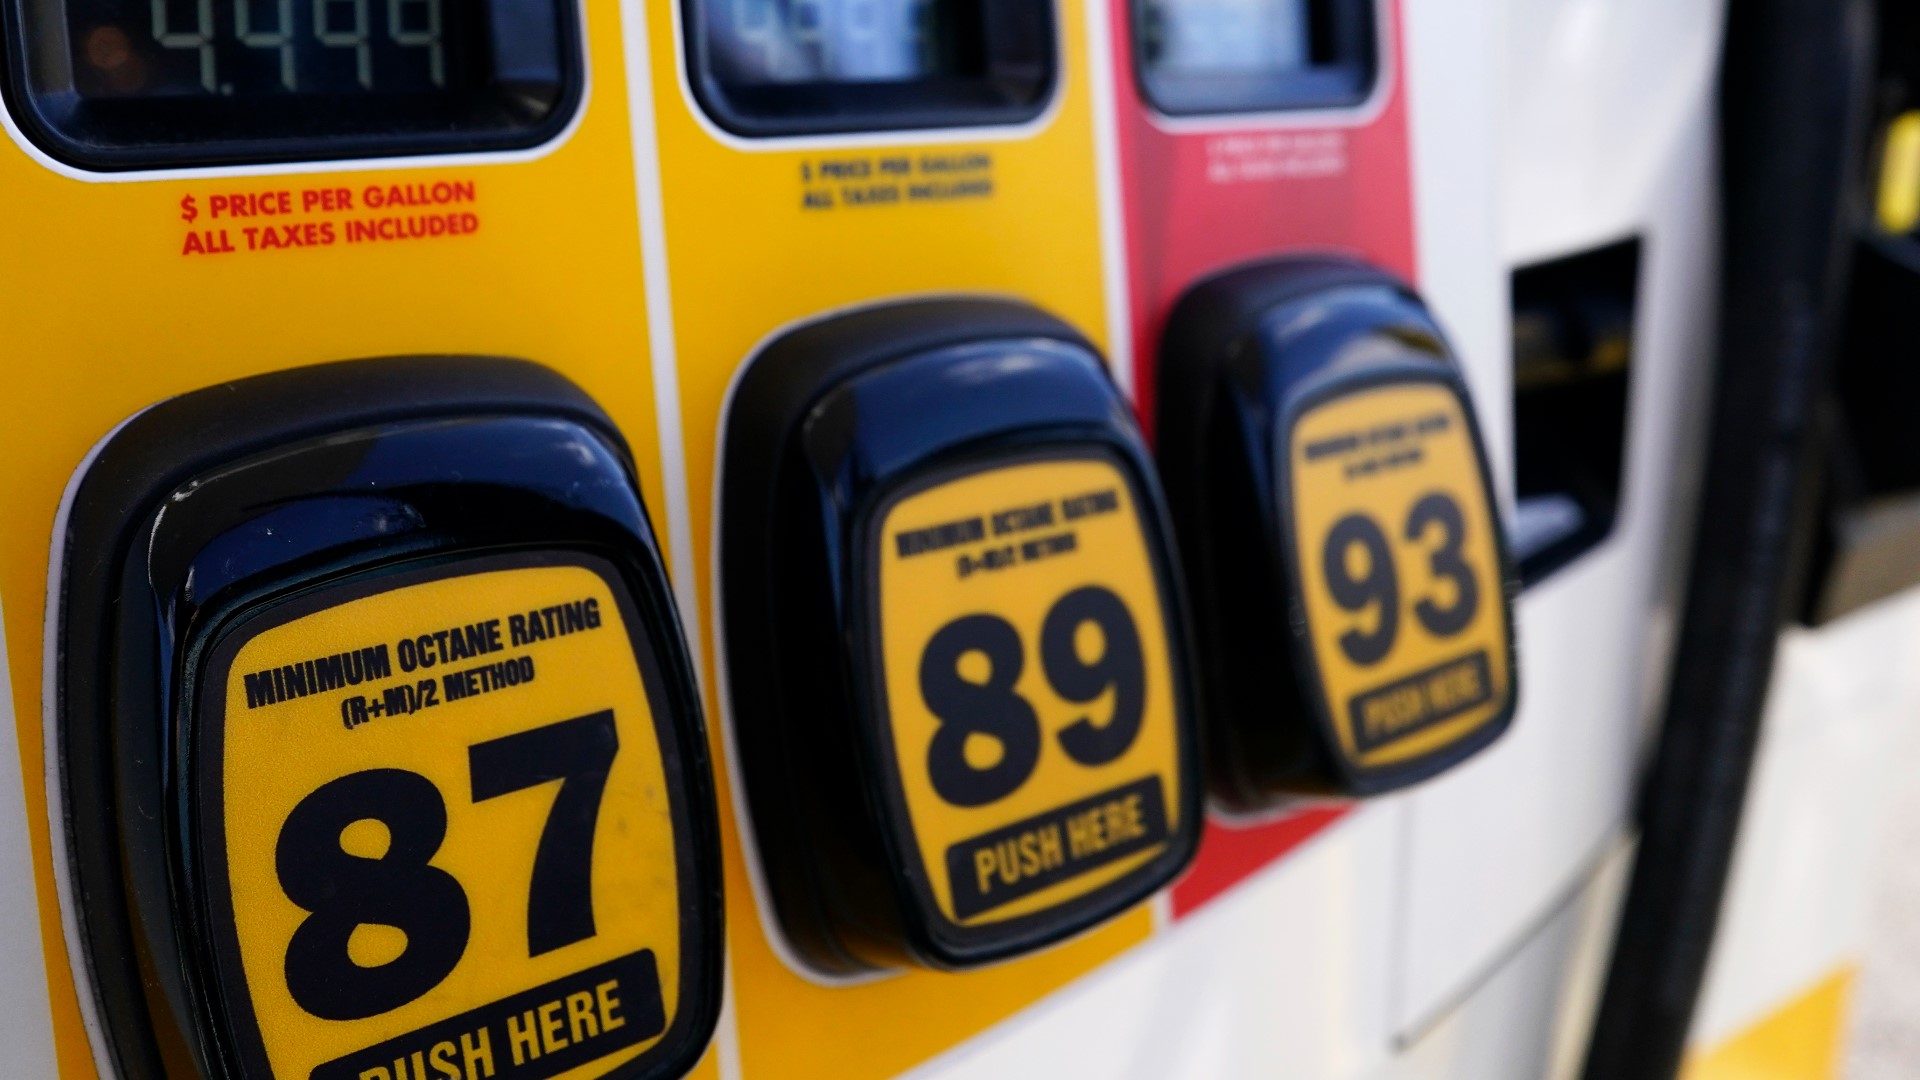 Iowa would be the first state to require gas stations have pumps selling fuel with at least 15% ethanol under a bill that received final legislative approval Tuesday